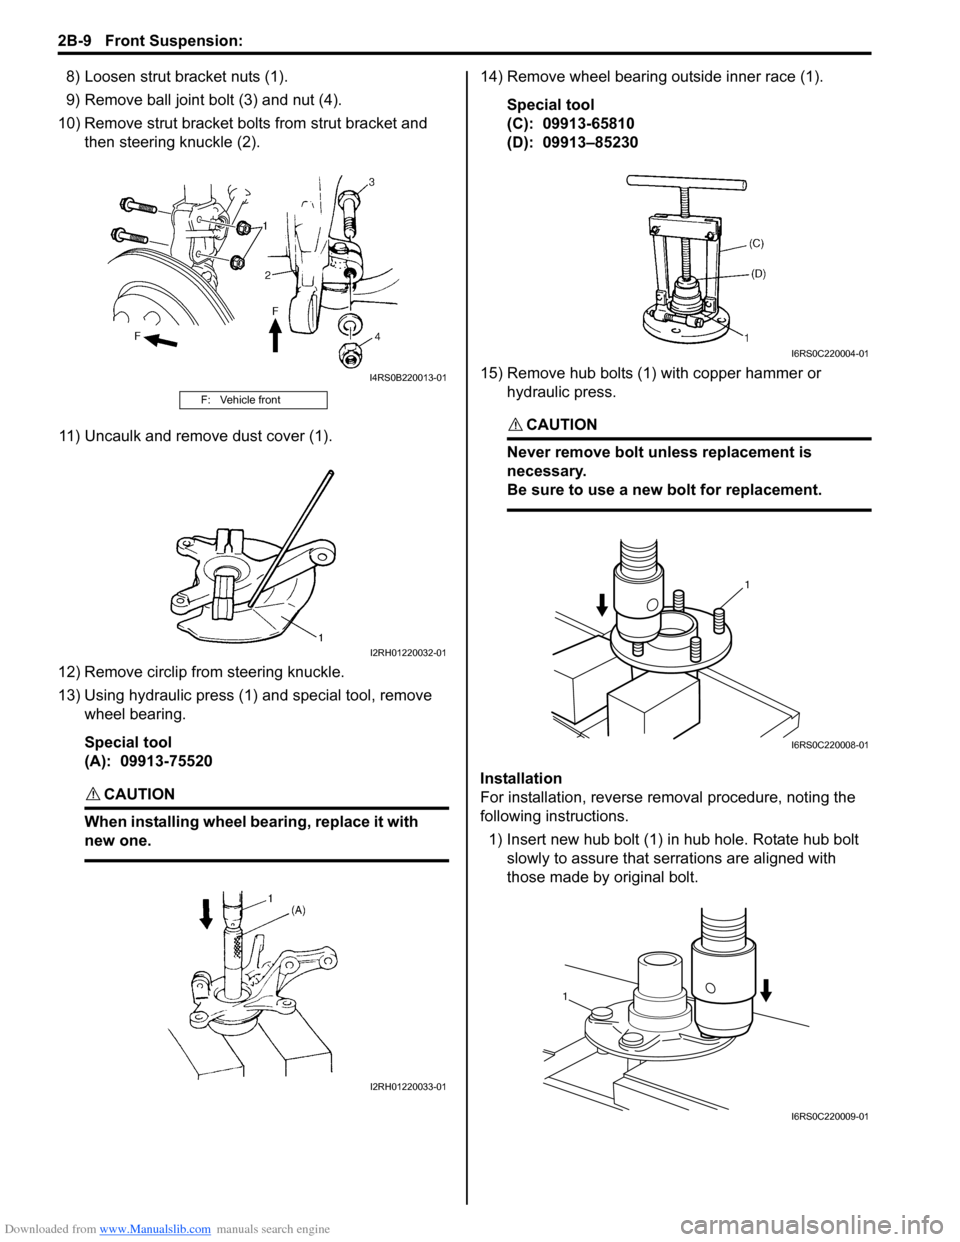 SUZUKI SWIFT 2008 2.G Service Workshop Manual Downloaded from www.Manualslib.com manuals search engine 2B-9 Front Suspension: 
8) Loosen strut bracket nuts (1).
9) Remove ball joint bolt (3) and nut (4).
10) Remove strut bracket bolt s from strut